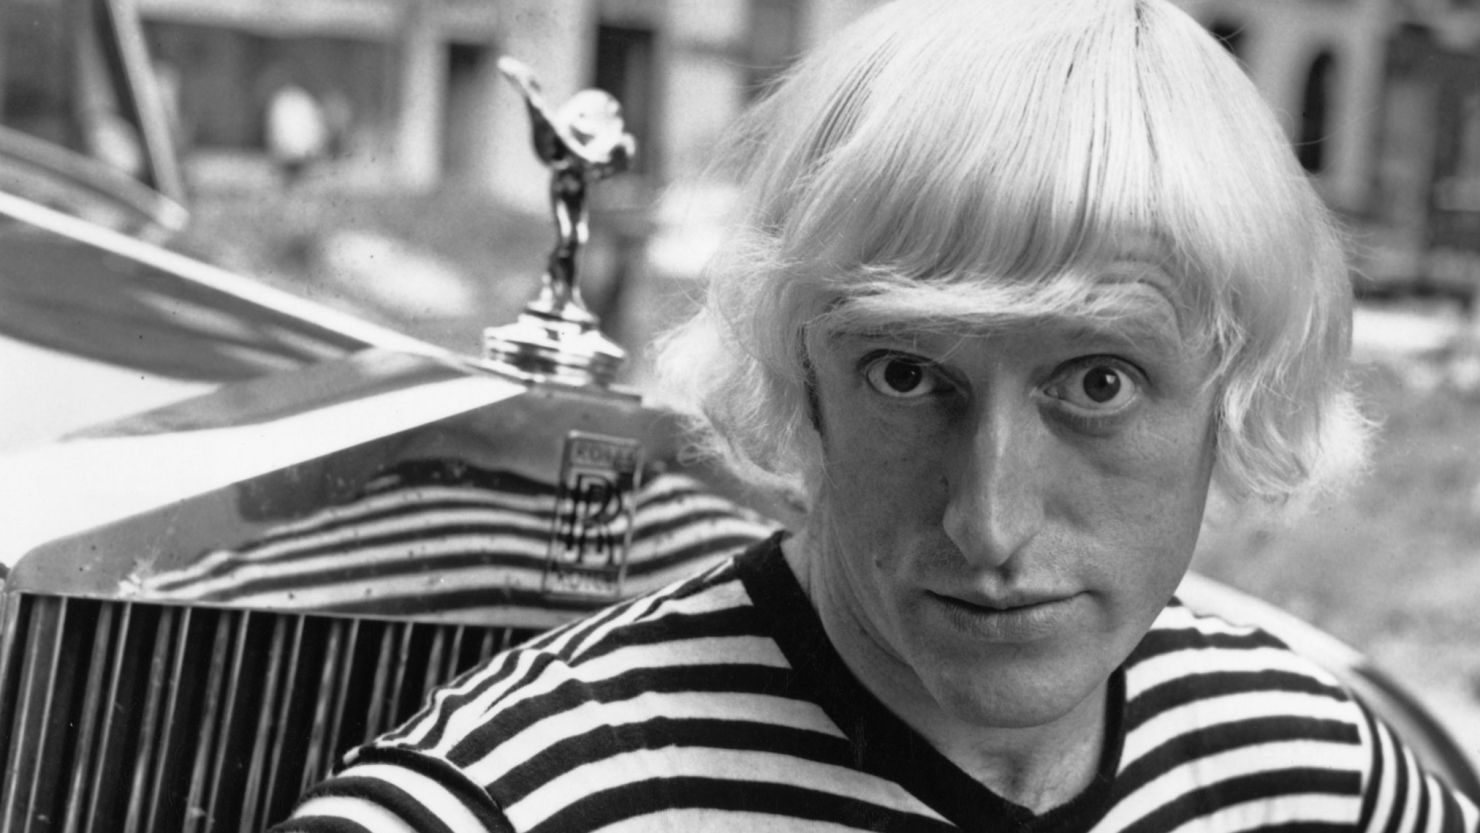 Jimmy Savile, who died in 2011, was accused of sexually abusing untold numbers of people over decades.